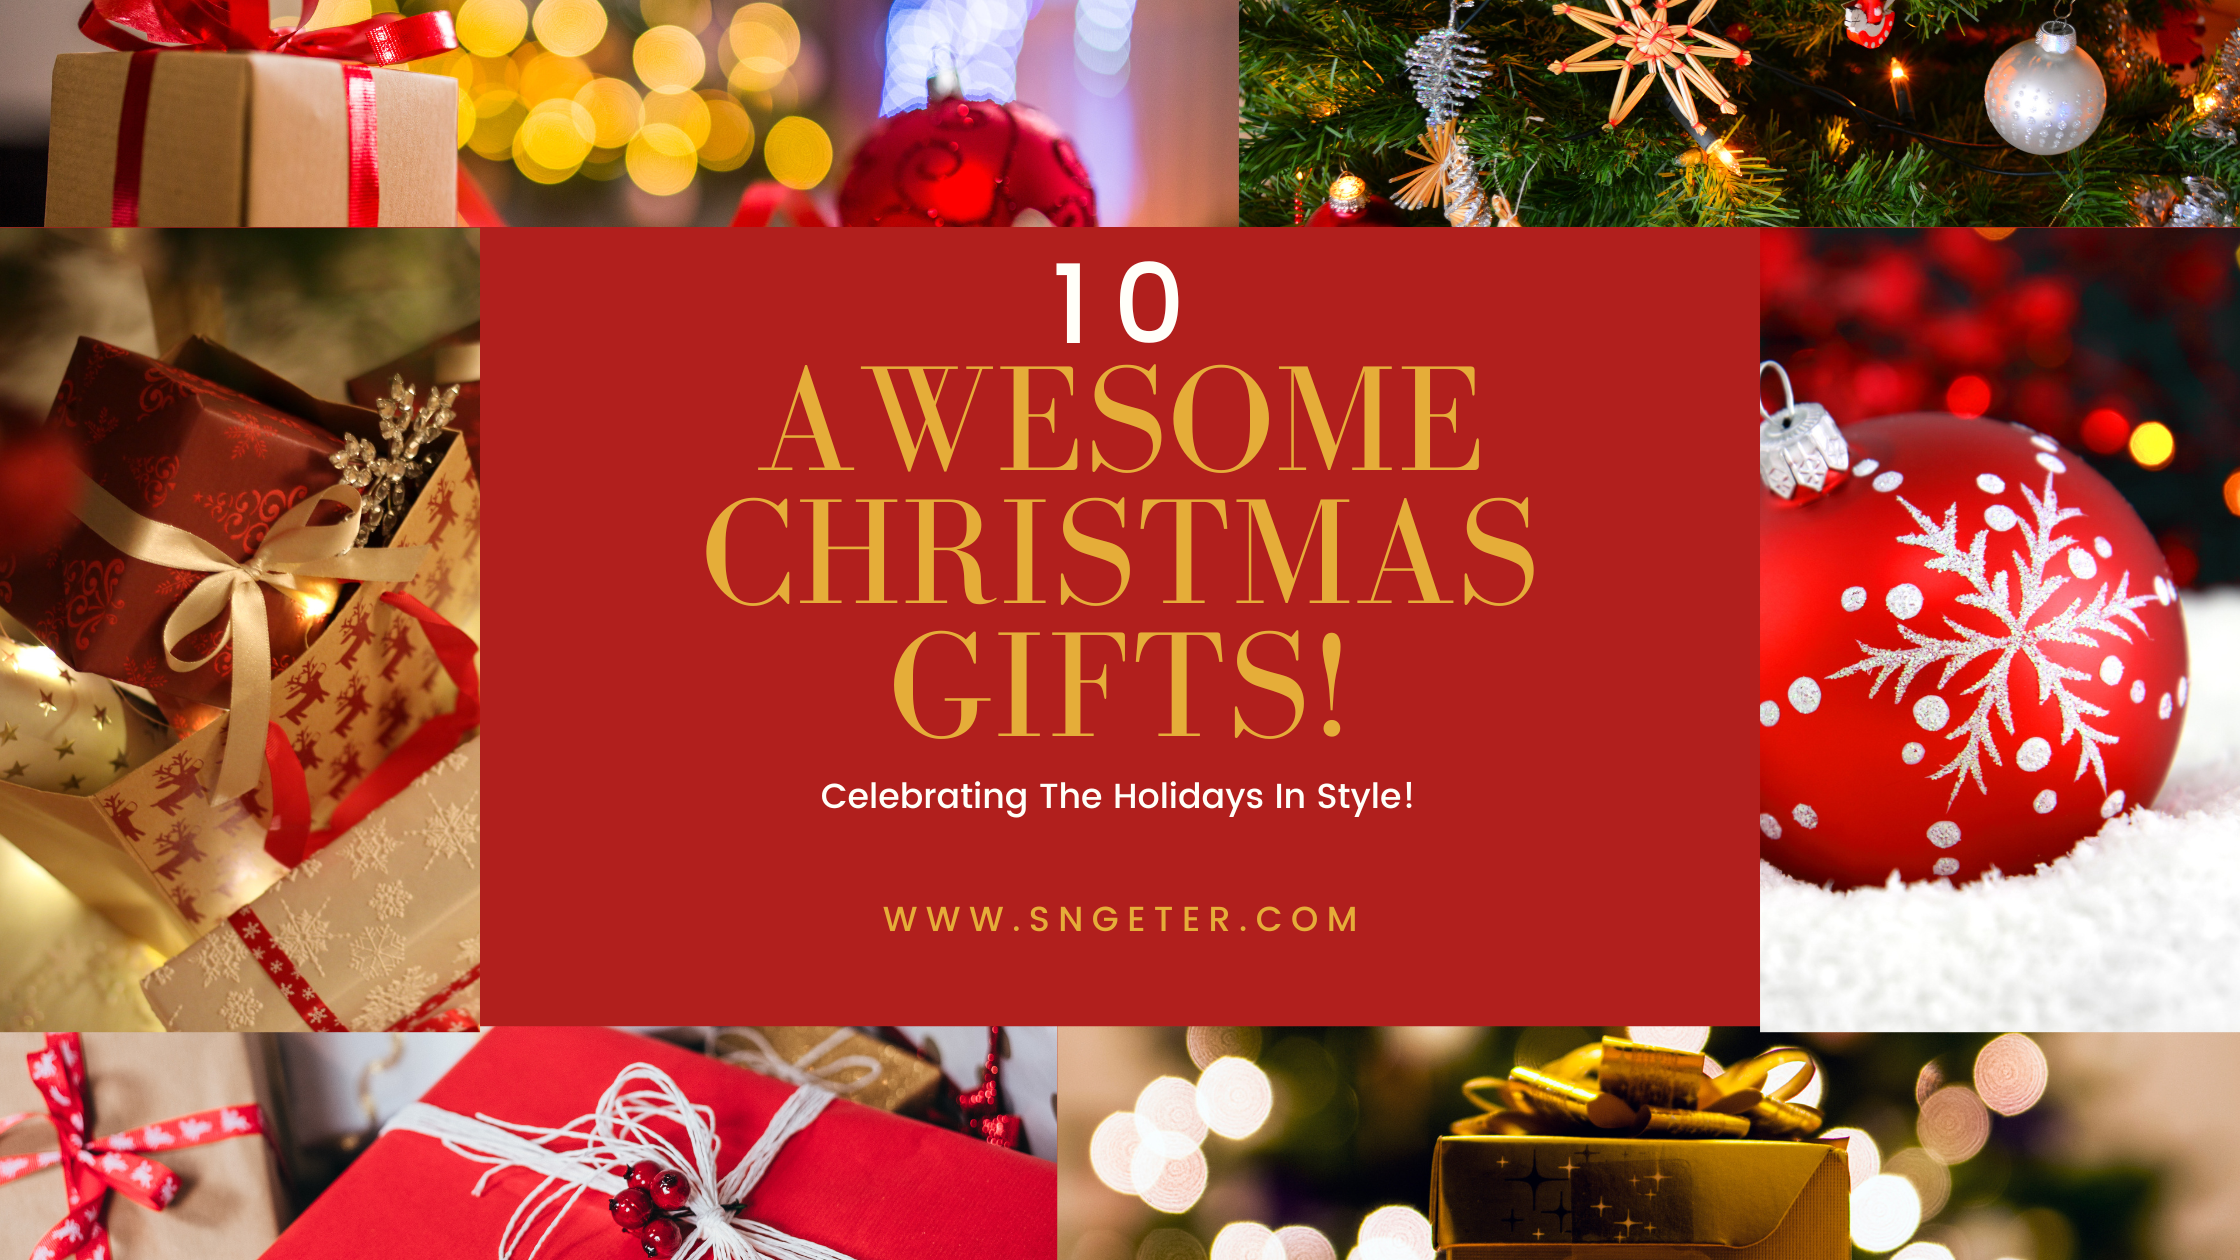 10 Awesome Christmas Gift Ideas